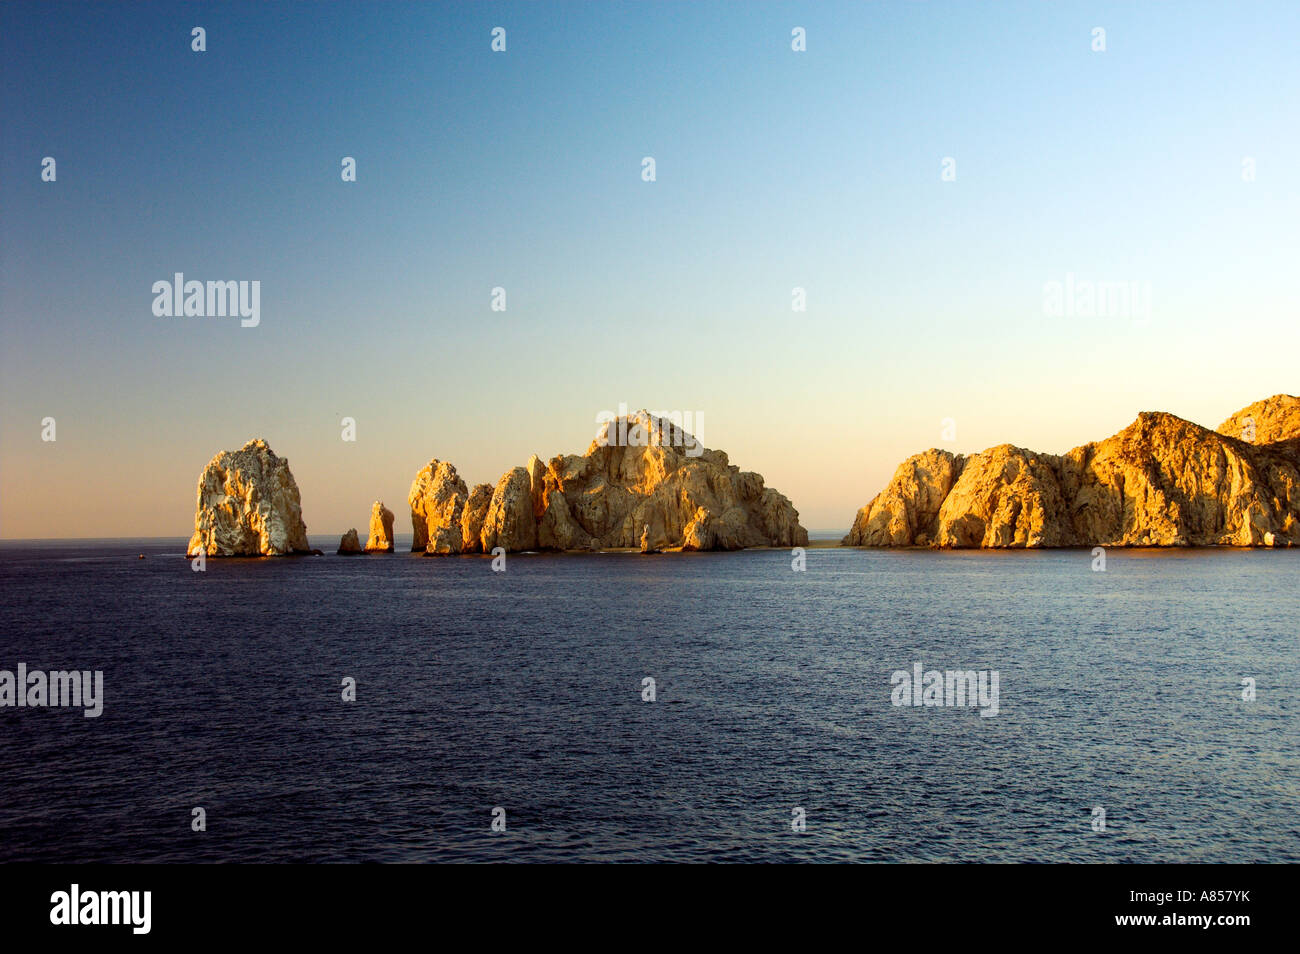 A series of rocks at lands end offshore at Cabo San Lucas Mexico Stock Photo